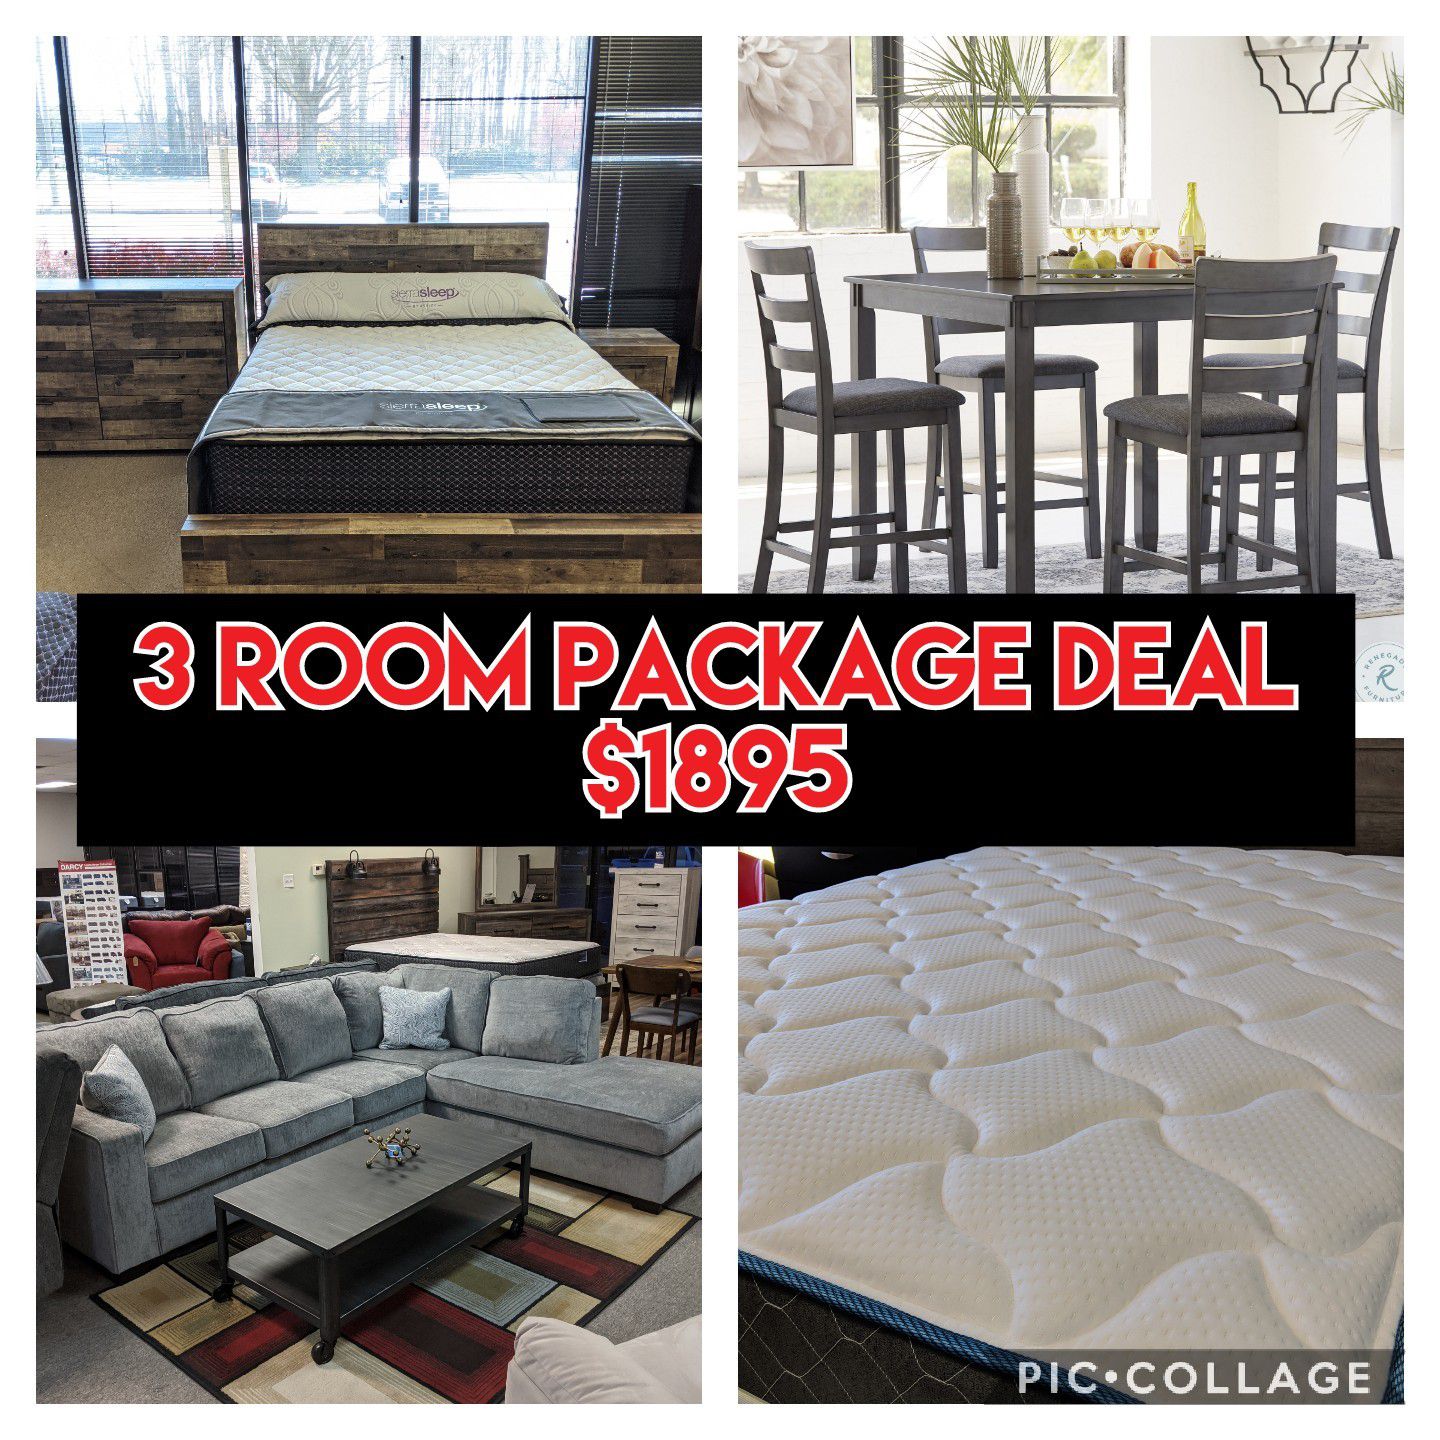 3 Room Package Deal - Queen Bedroom/ Sectional/ Table and Chairs - $1895 - $40 down take home today!! Up to 12 months SAC FINANCING AVAILABLE!!!